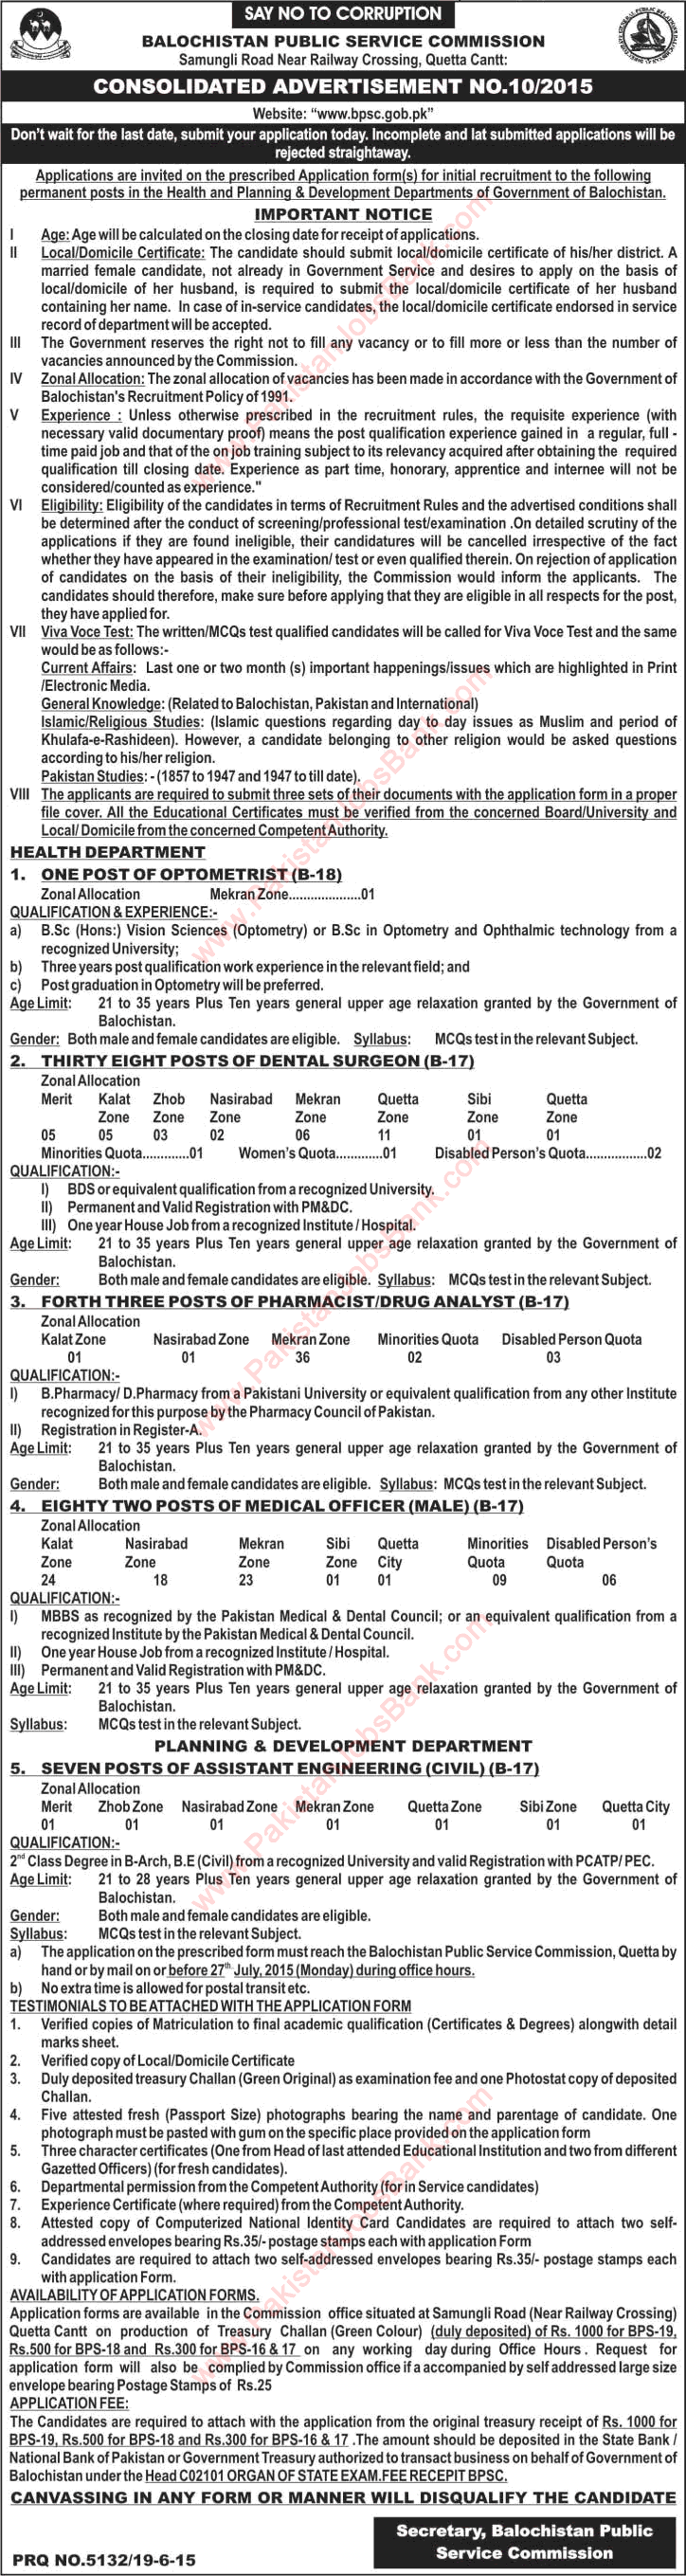 Balochistan Public Service Commission Jobs June 2015 BPSC Consolidated Advertisement No. 10/2015